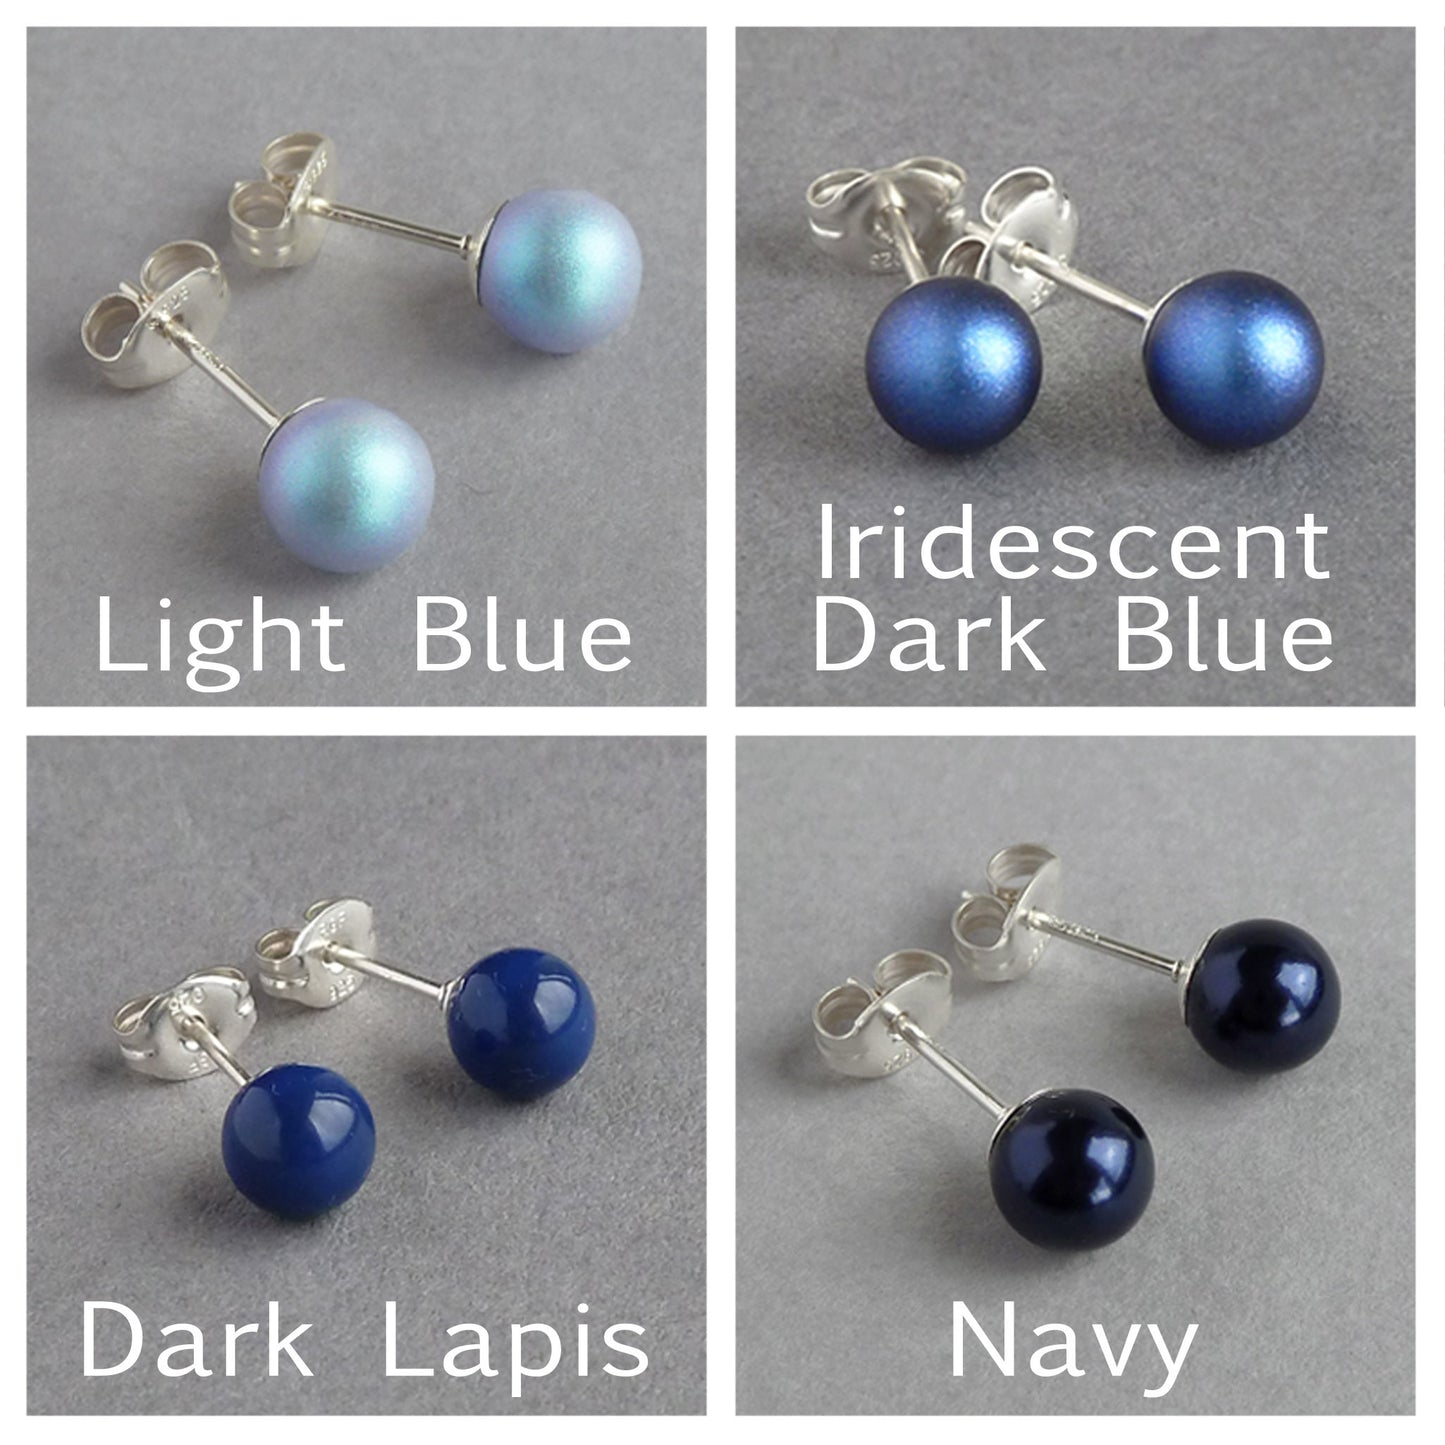 6mm Pearl Stud Earrings - Choose Your Own Colour Small Pearl Studs